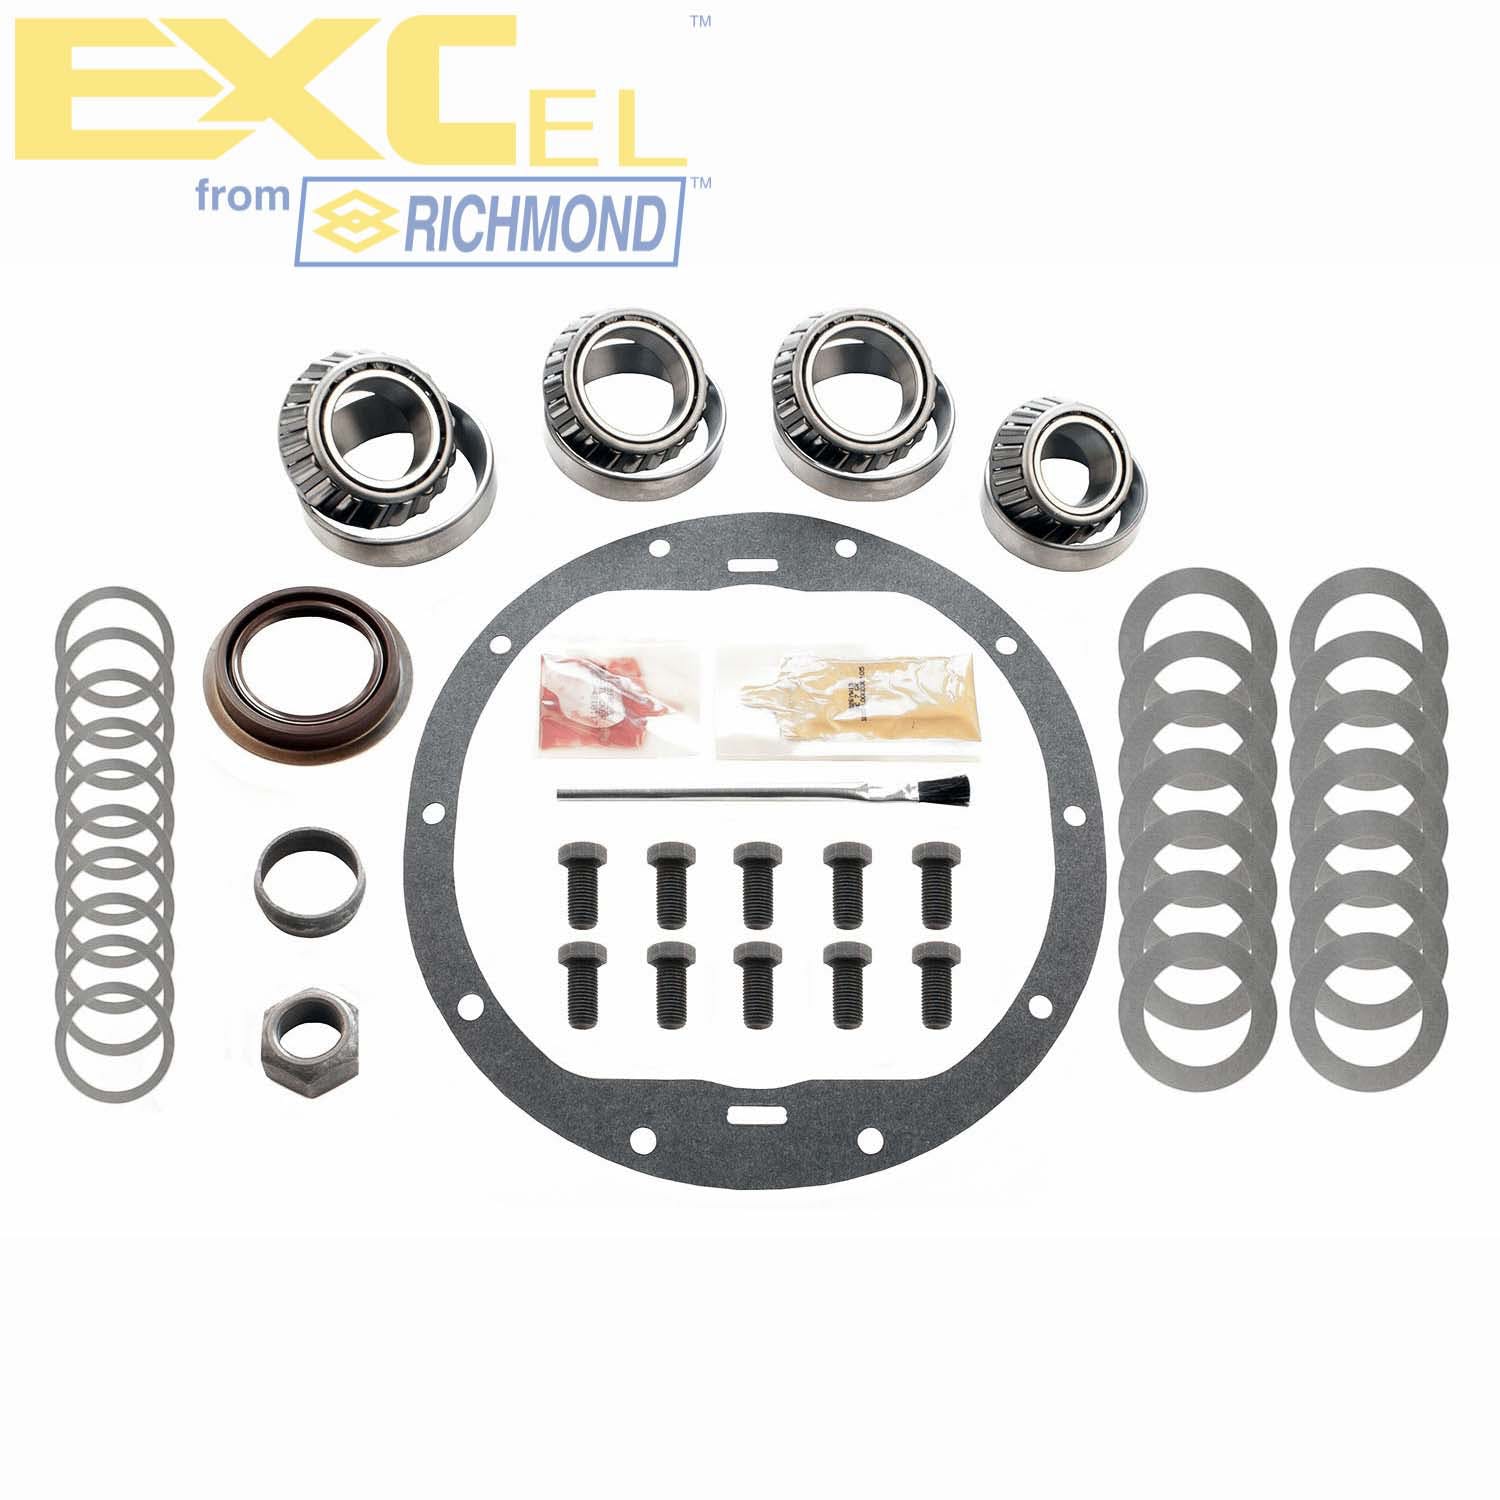 Excel XL-1026-1 Differential Bearing Kit